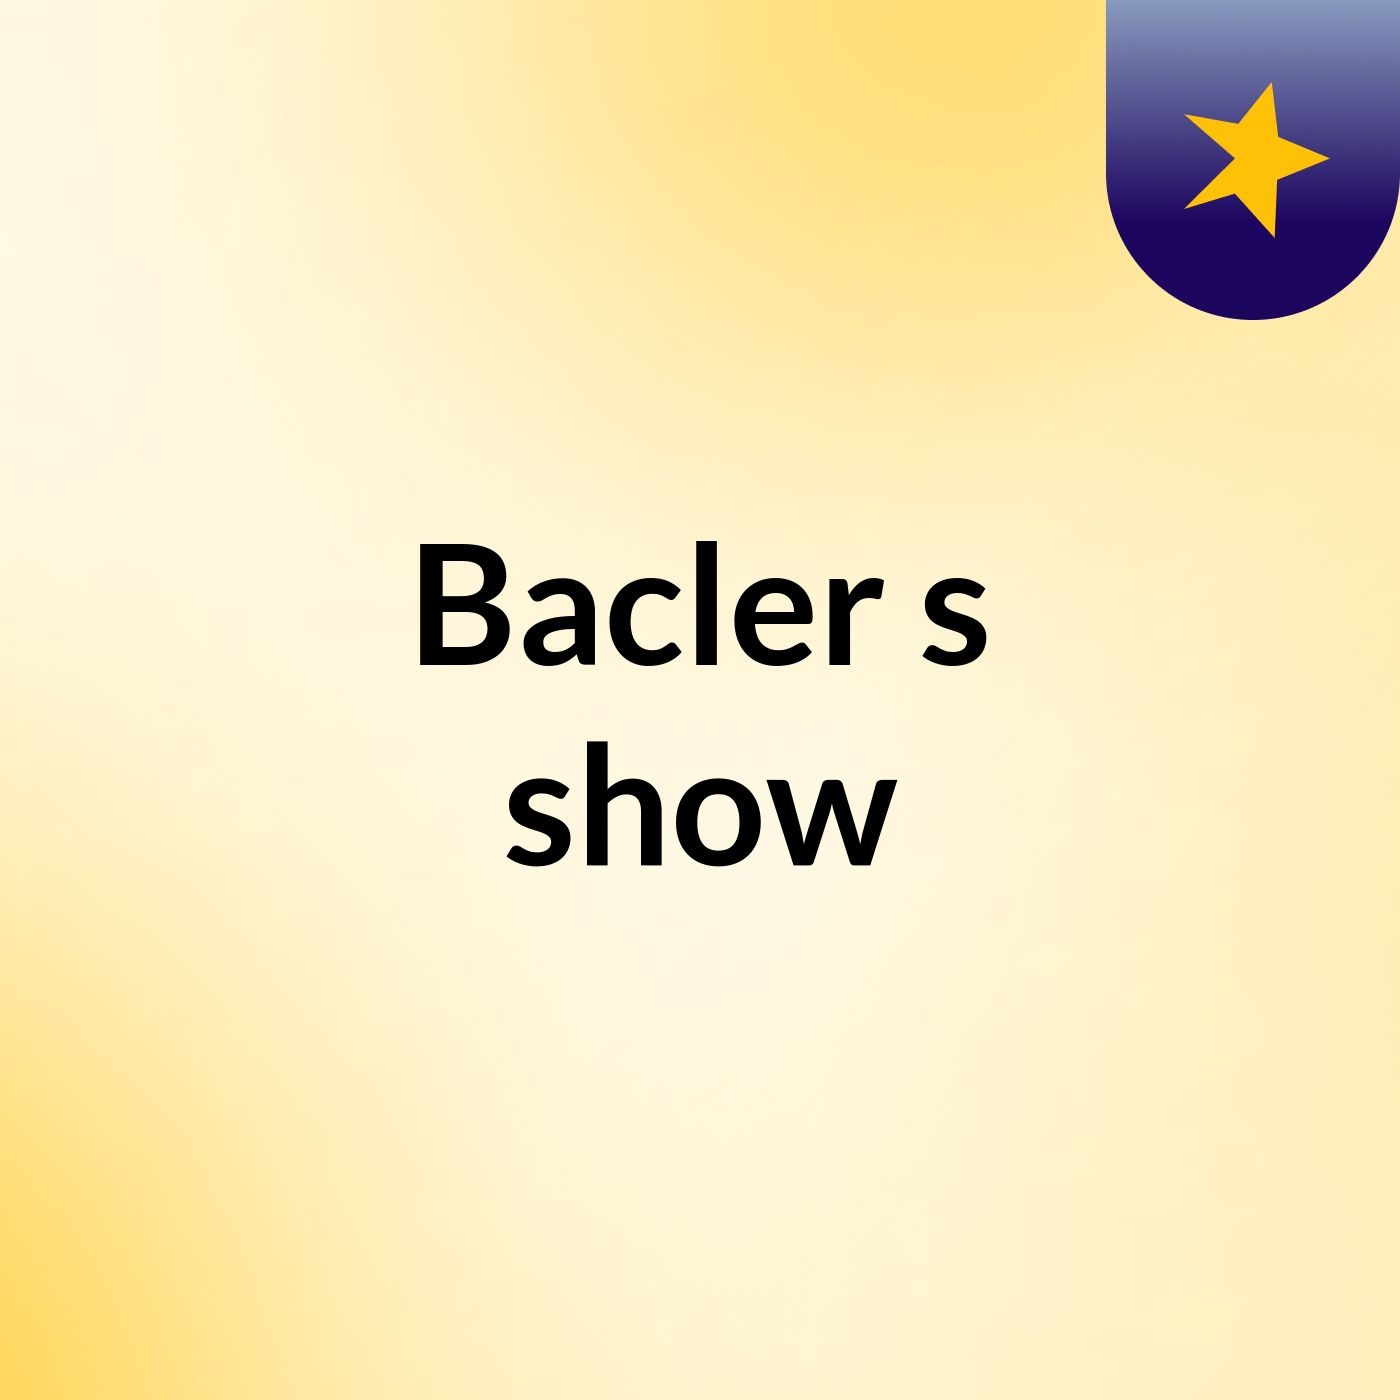 Bacler's show